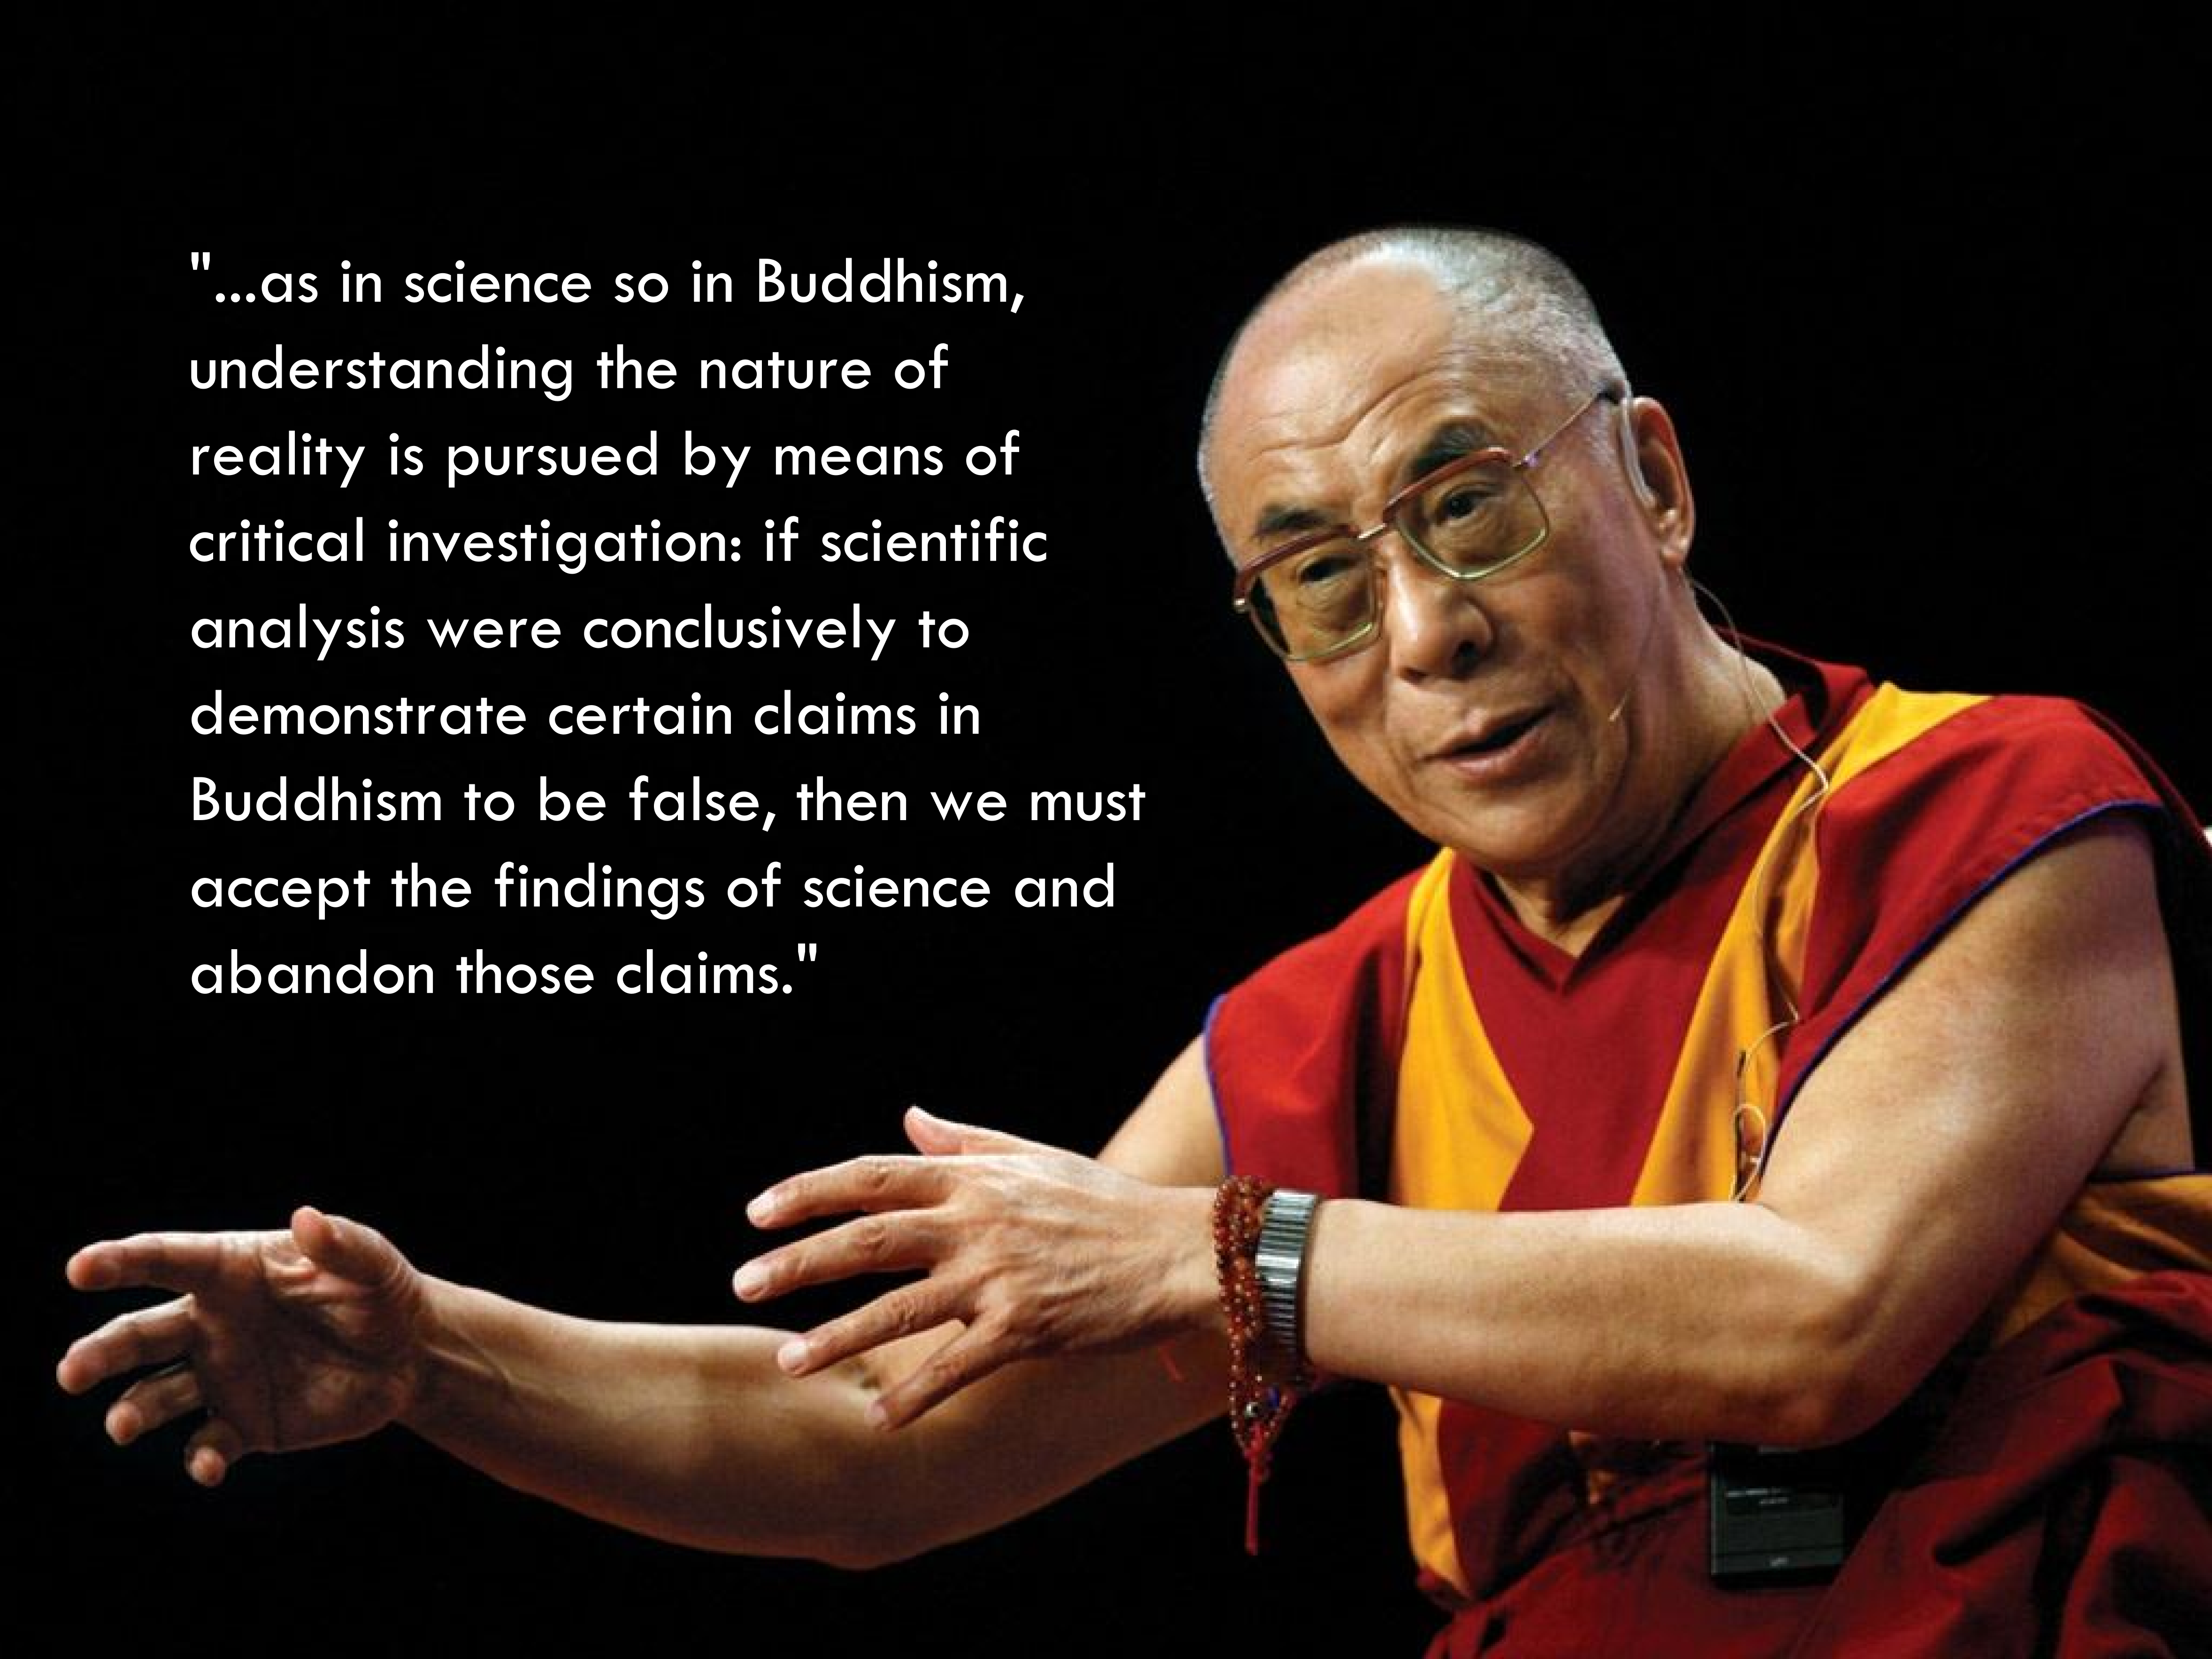 Having criticized atheism, now it’s time to defend it against strawmen Dalai-lama-science